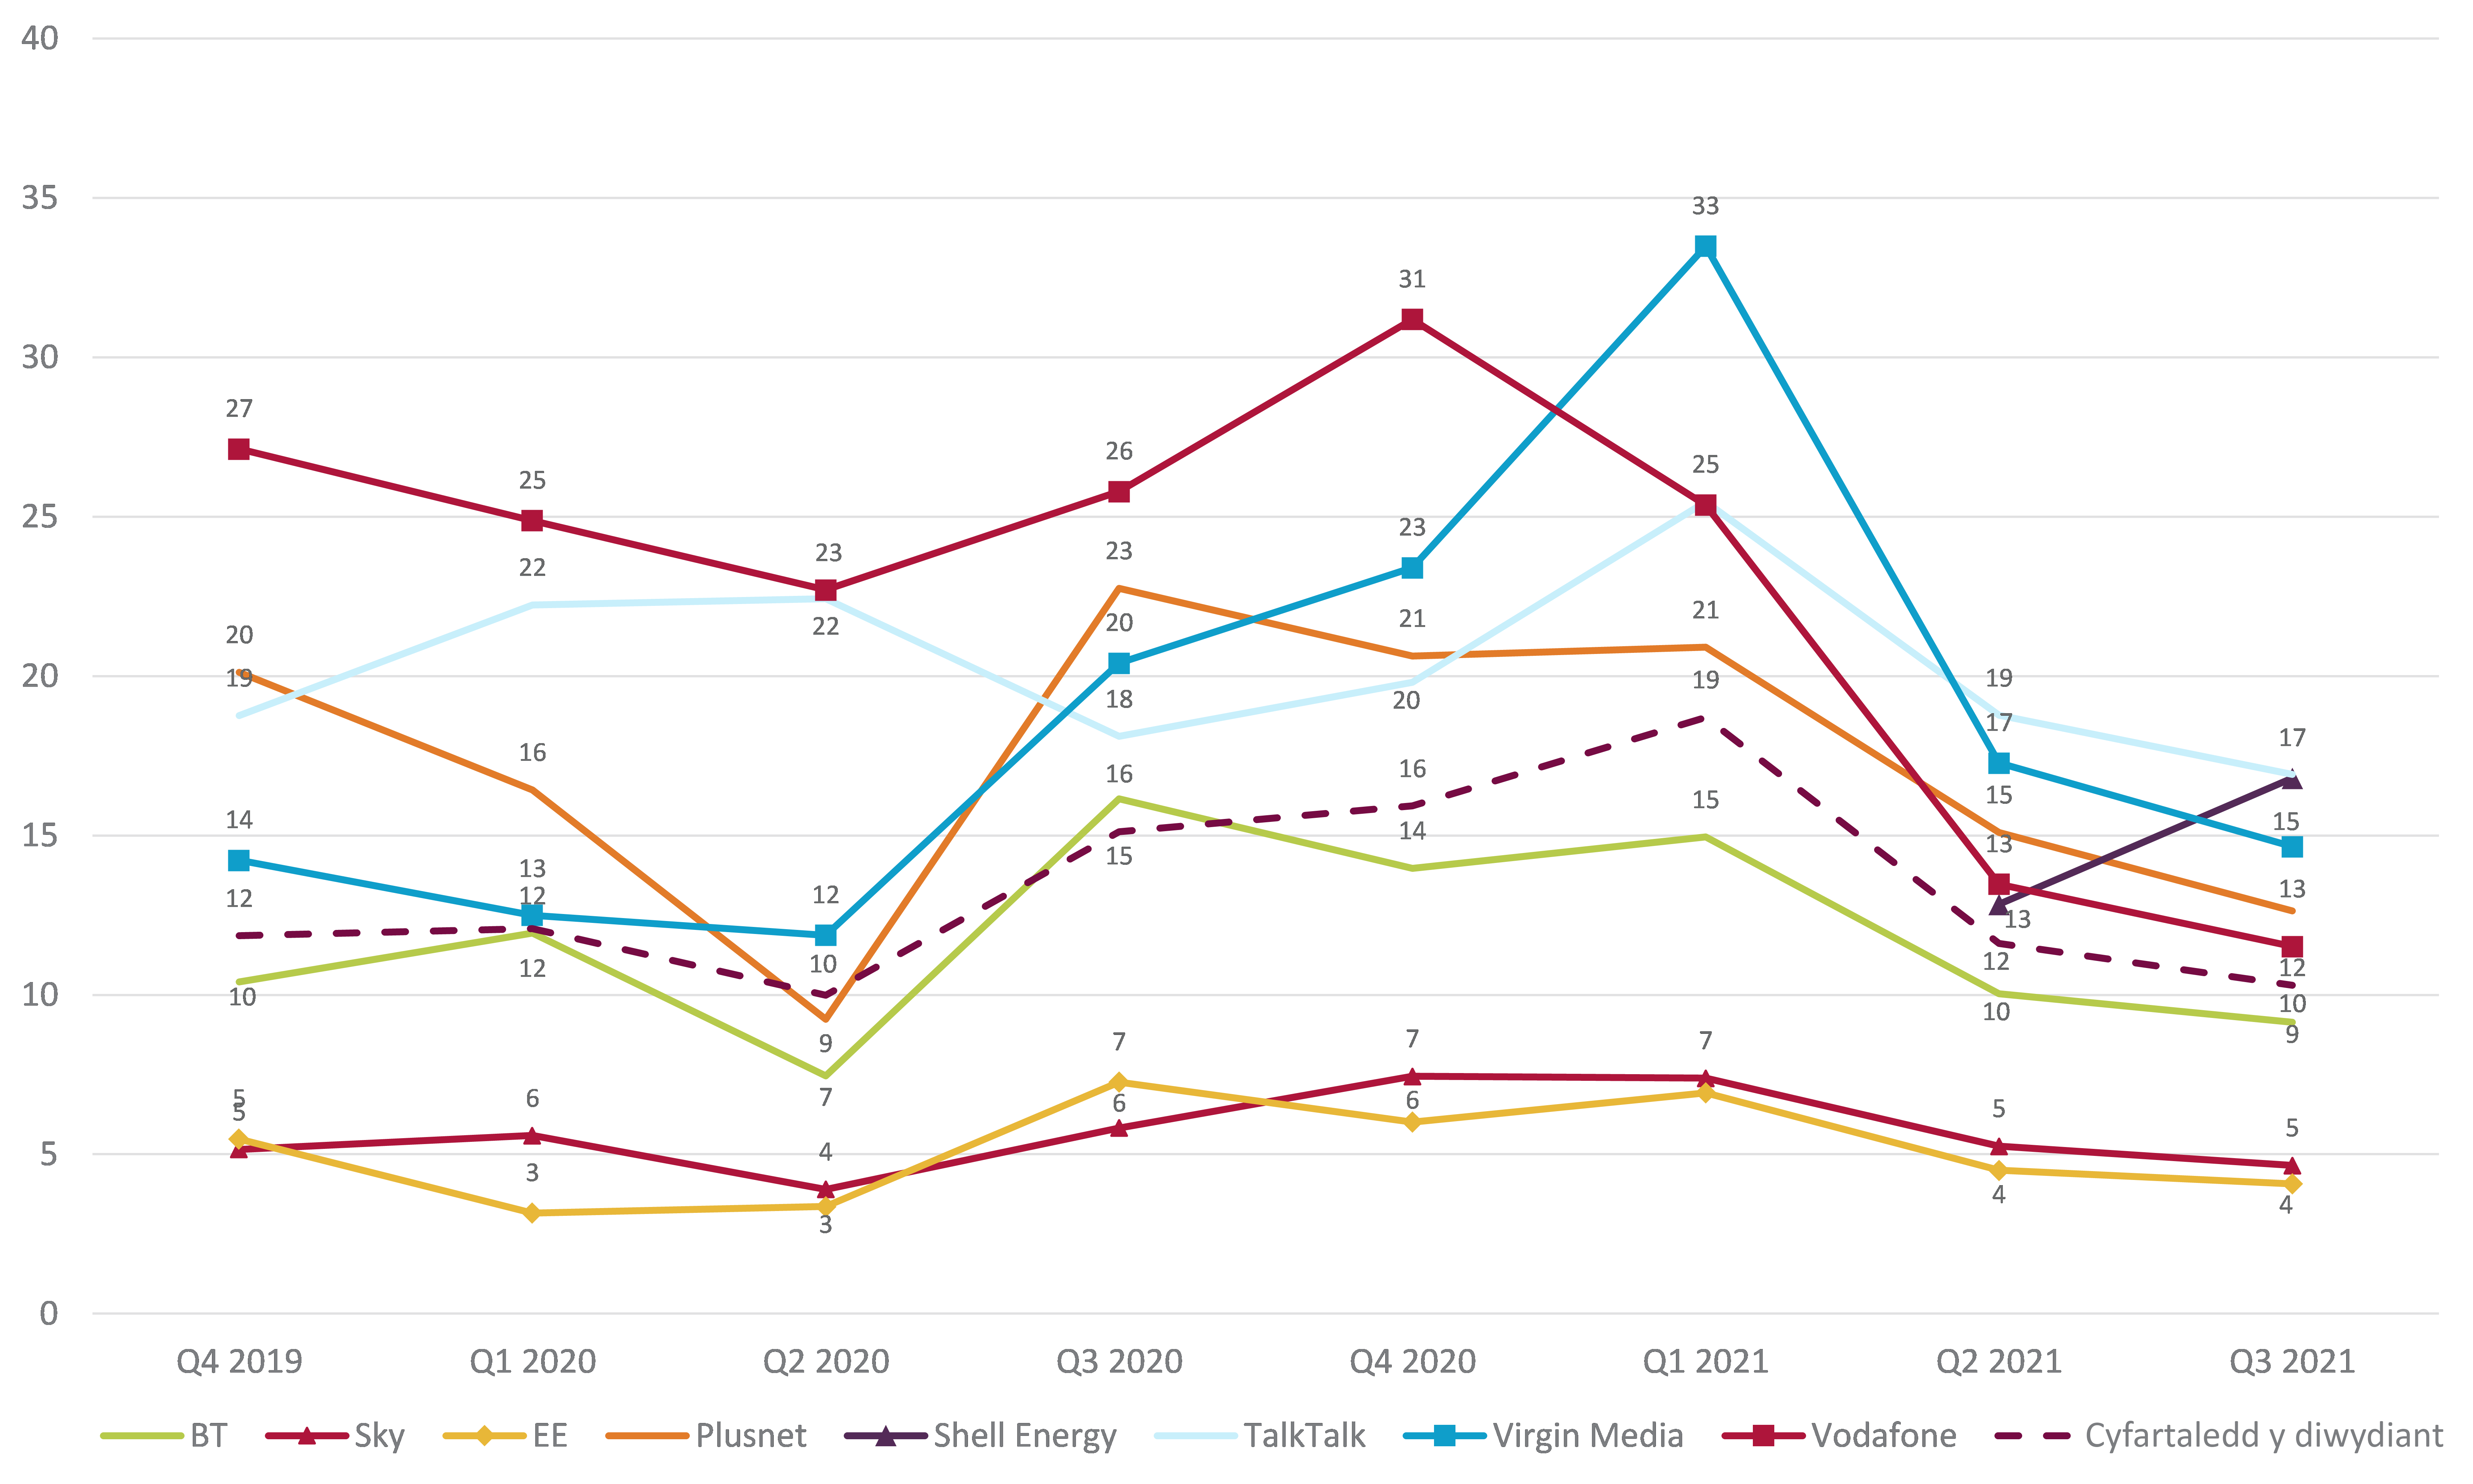 Graph showing trend data on residential consumer complaints received by Ofcom across fixed broadband by communications provider. It shows the fixed broadband complaints per 100,000 subscribers for the Q4 2019 – Q3 2021 period. TalkTalk and Shell Energy generated the highest volume of fixed broadband complaints (at 17) in Q3 2021 followed by Virgin Media at 15. EE and Sky generated the lowest volume of fixed broadband complaints at 4 and 5 respectively.